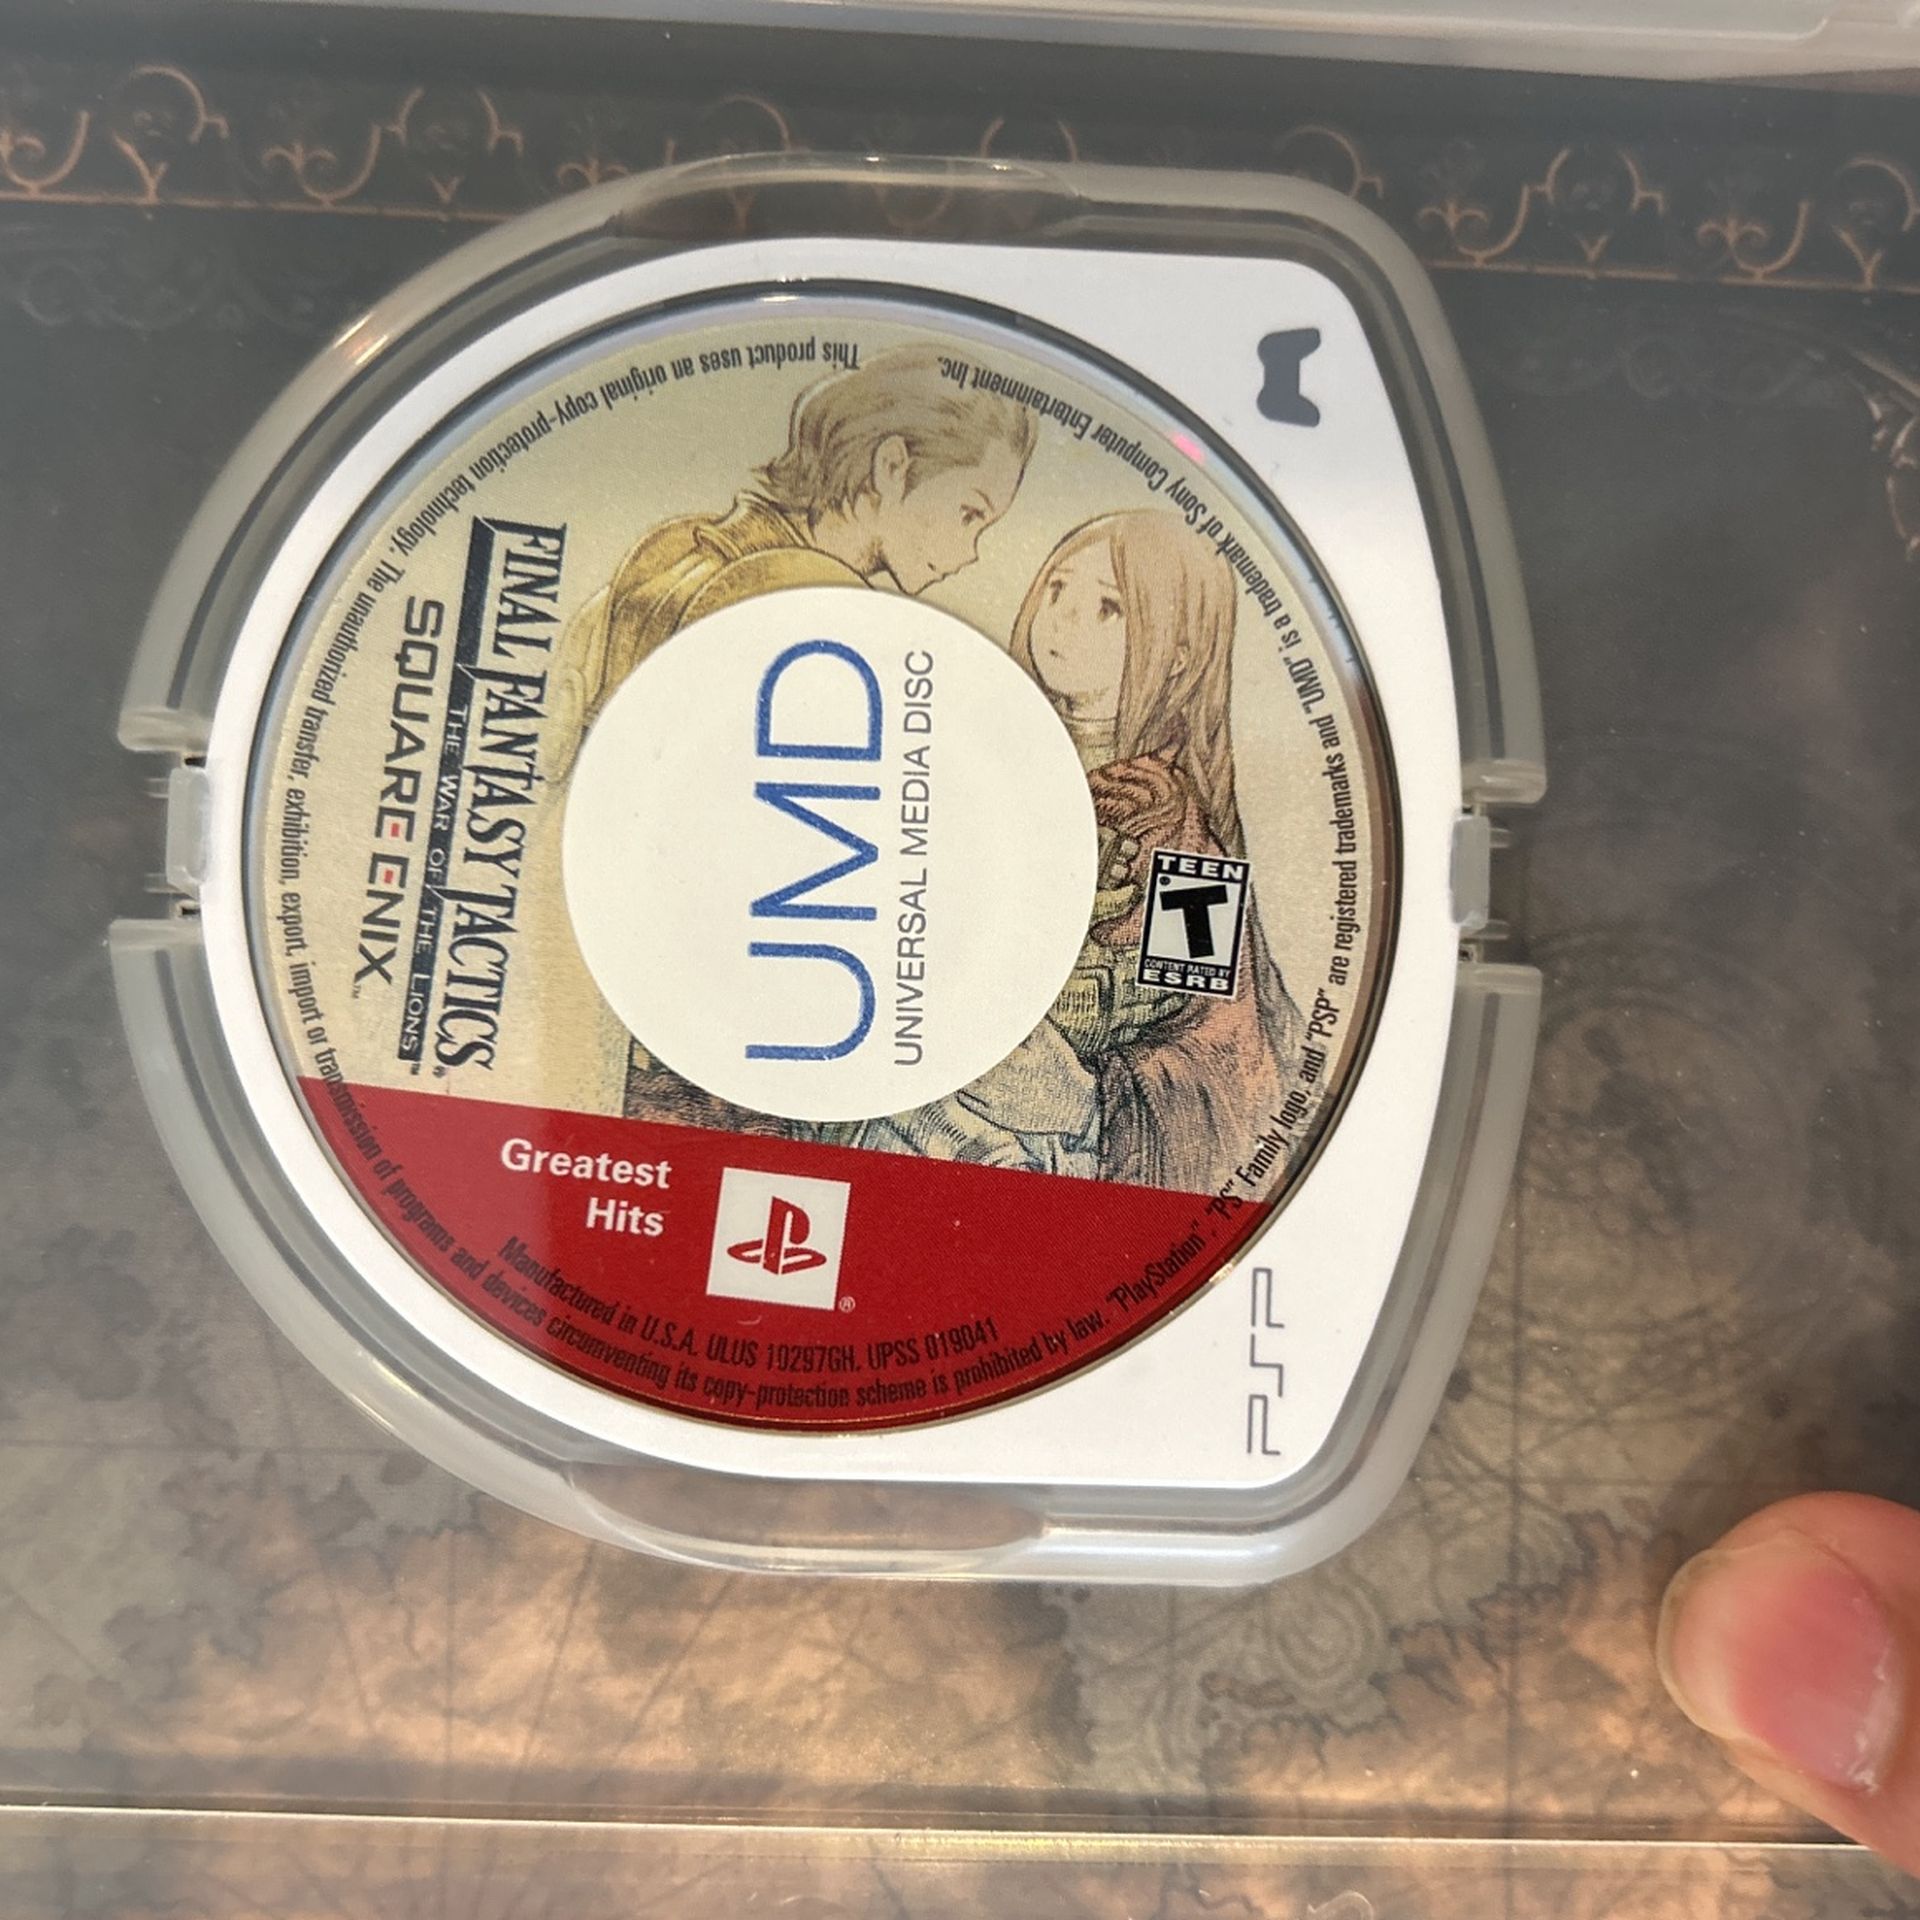 PlayStation PSP Greatest Hits Final Fantasy Tactics The War Of The Lions